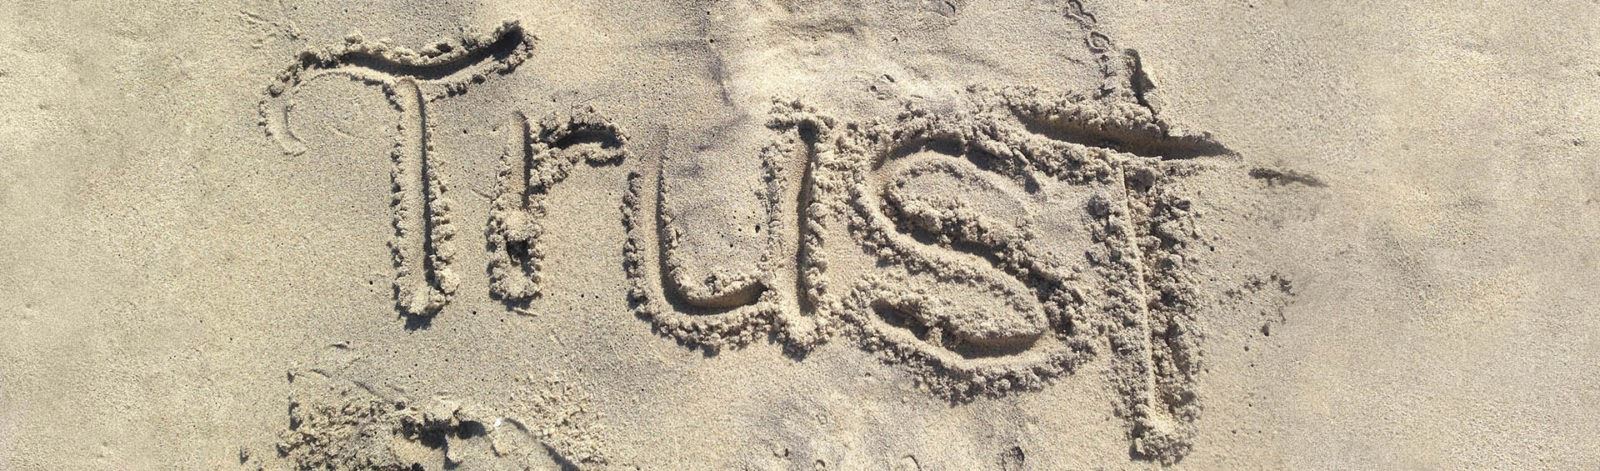 word trust in sand